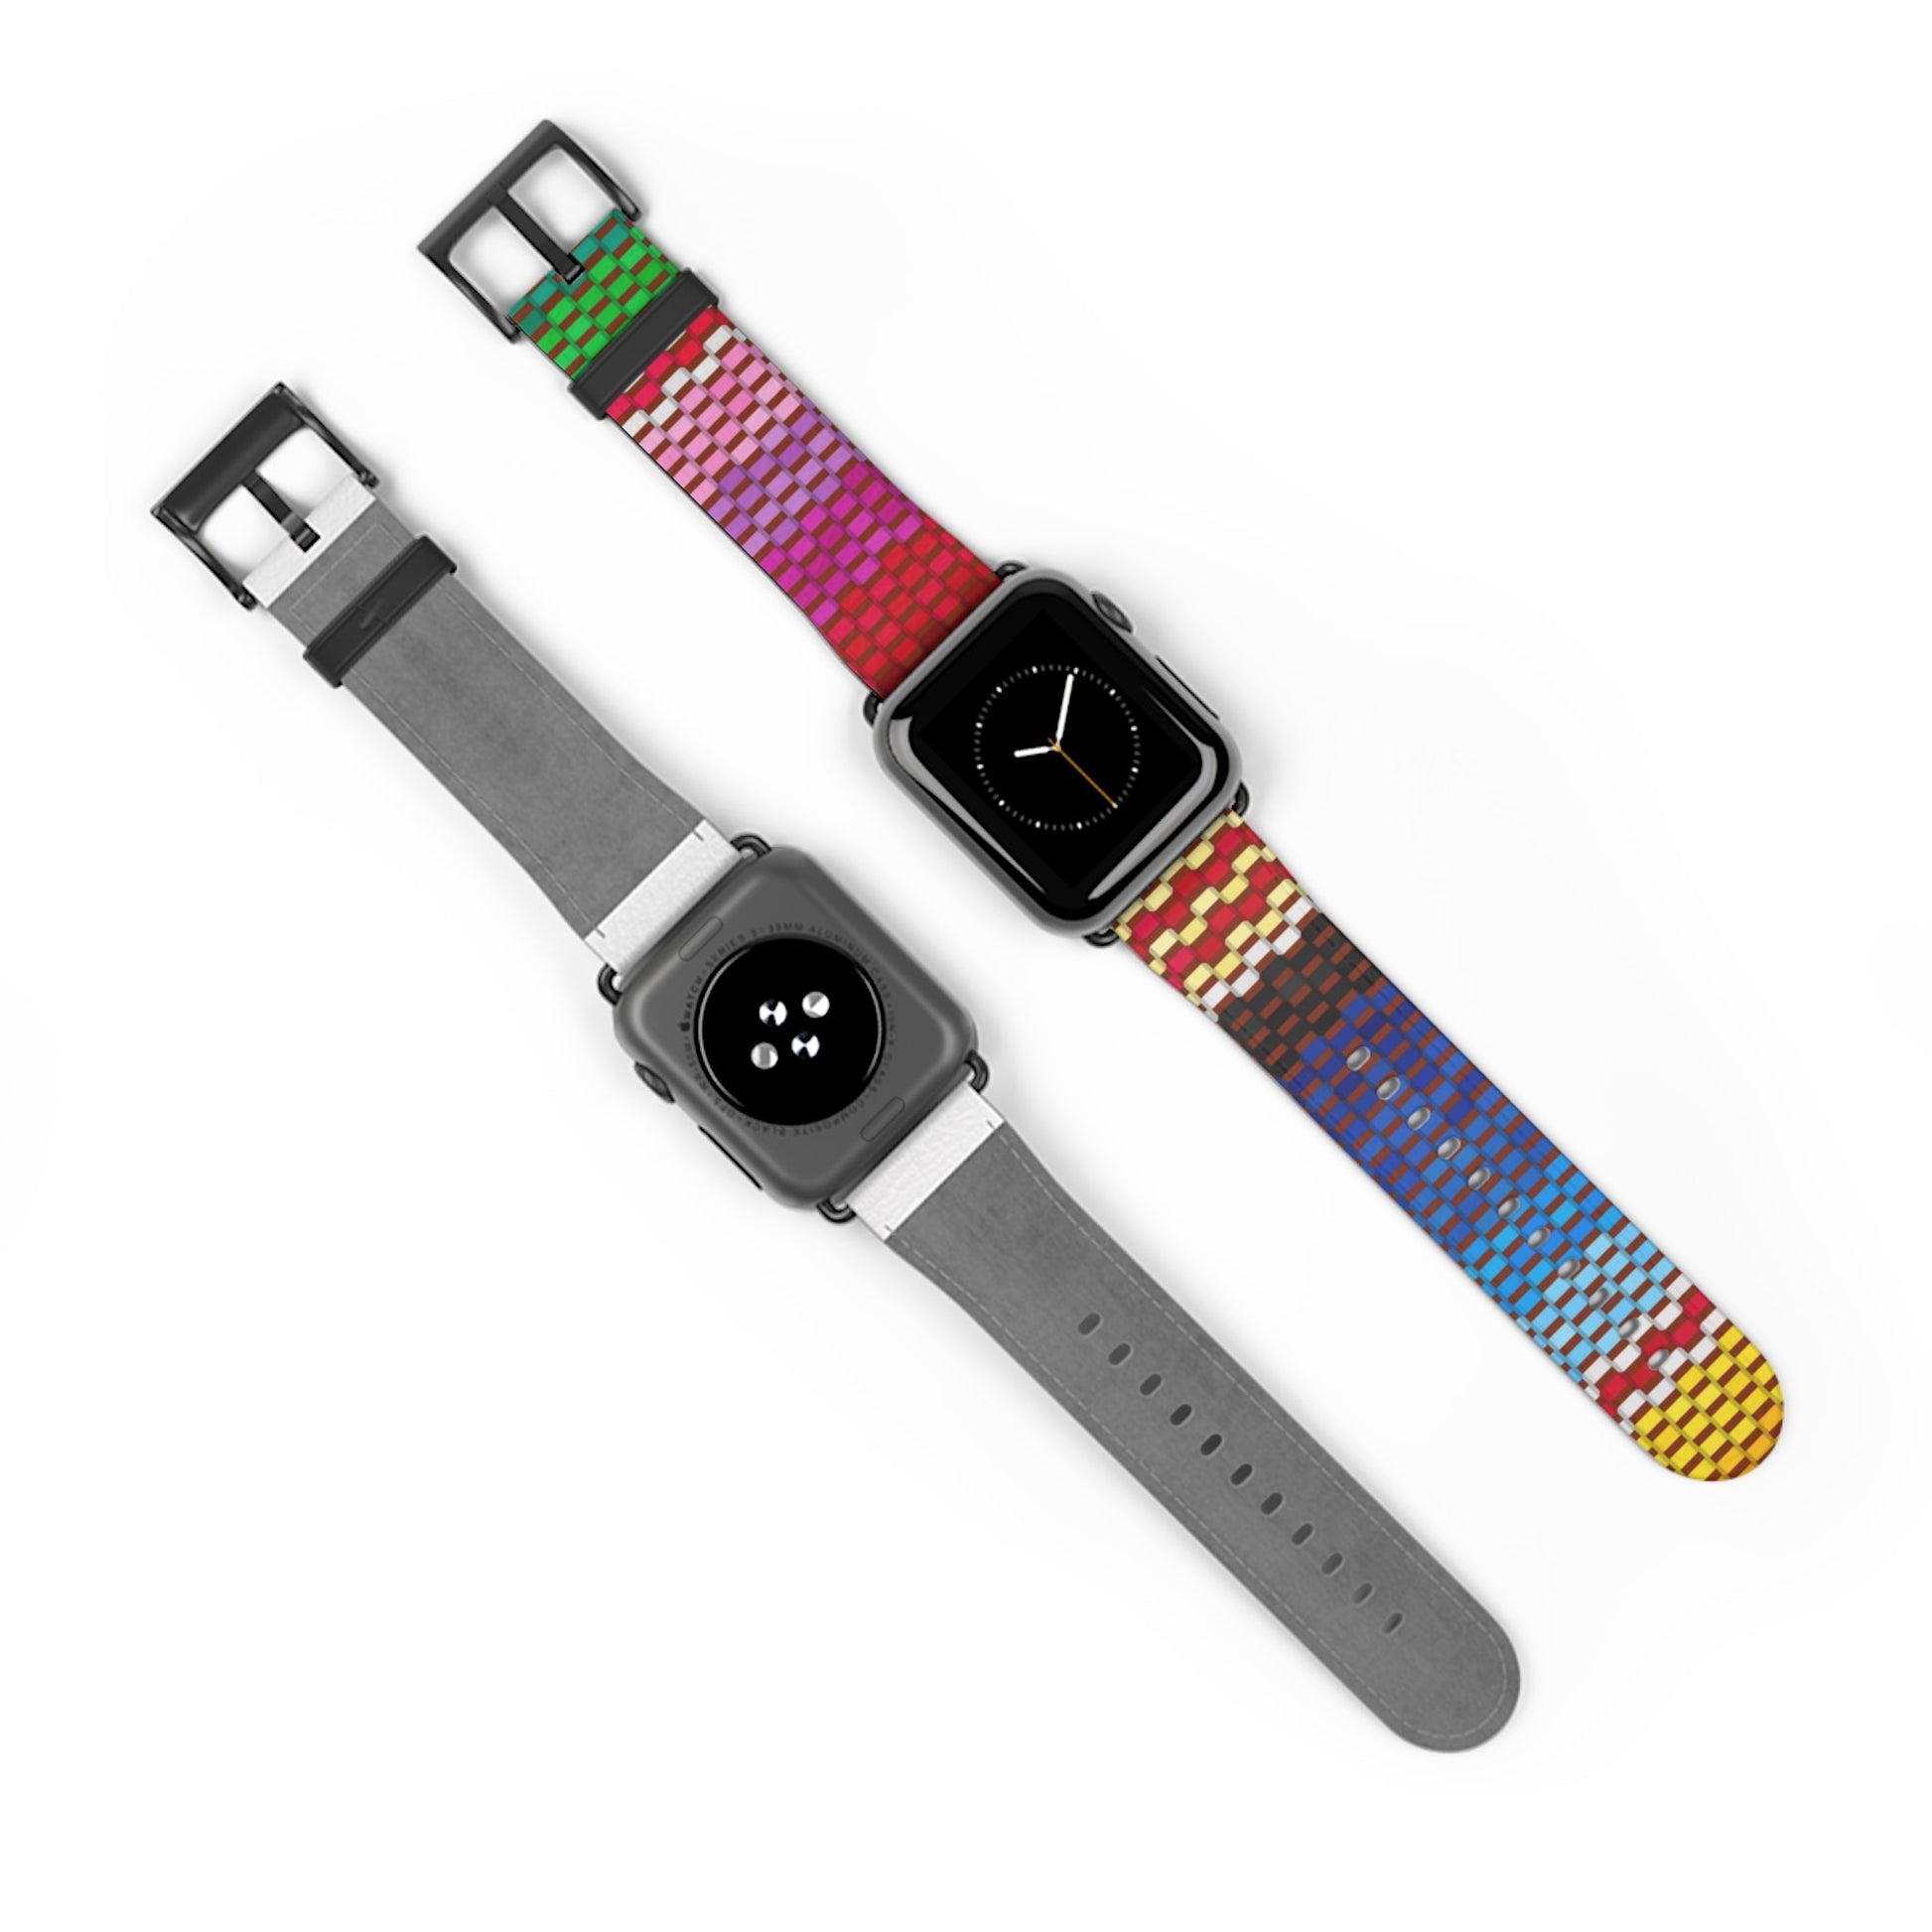 Canvas Design Watch Band for Apple Watch Series 1, 2, 3, 4, 5, 6, 7, and SE devices-Shalav5